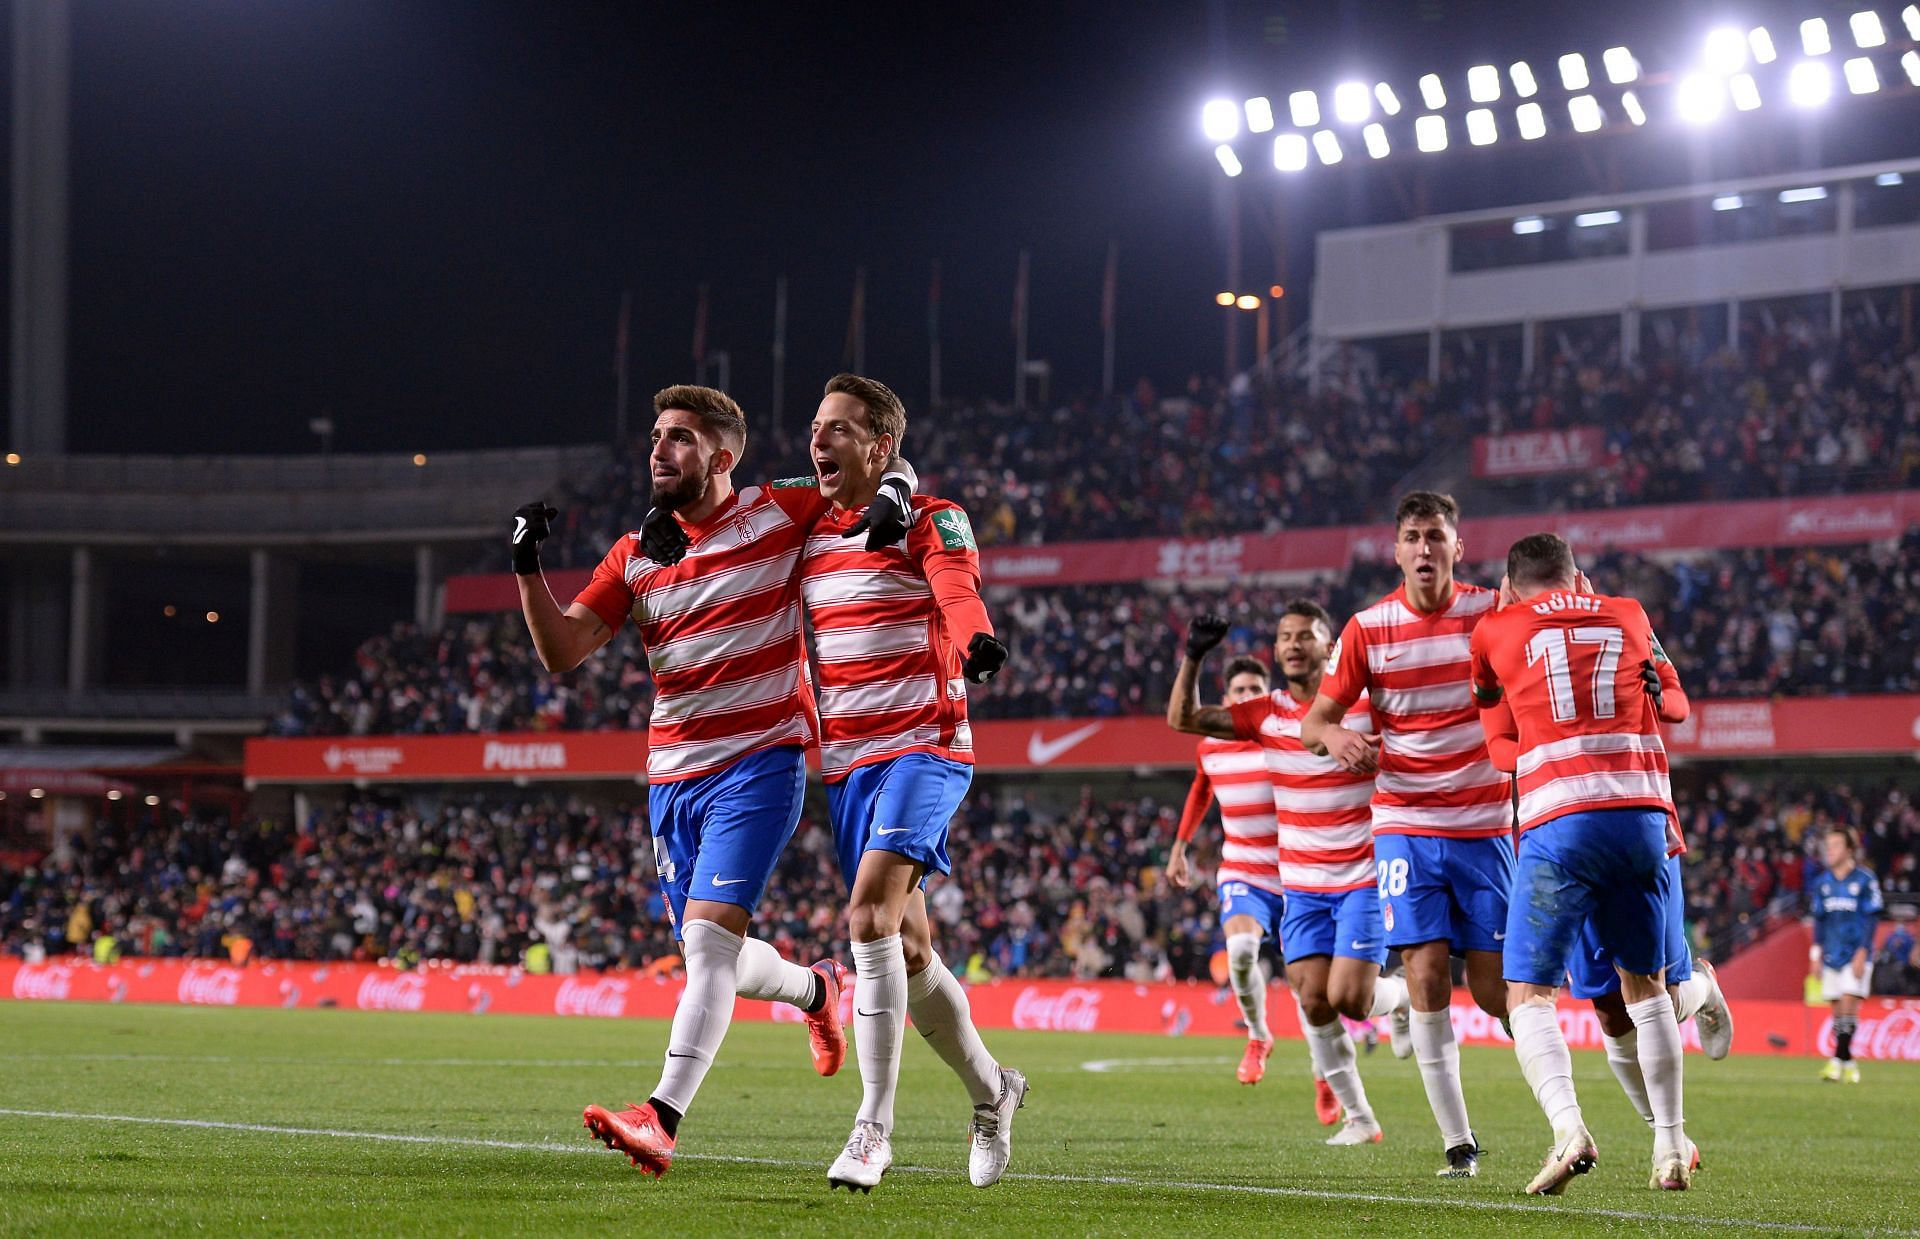 Granada are looking to climb up the table